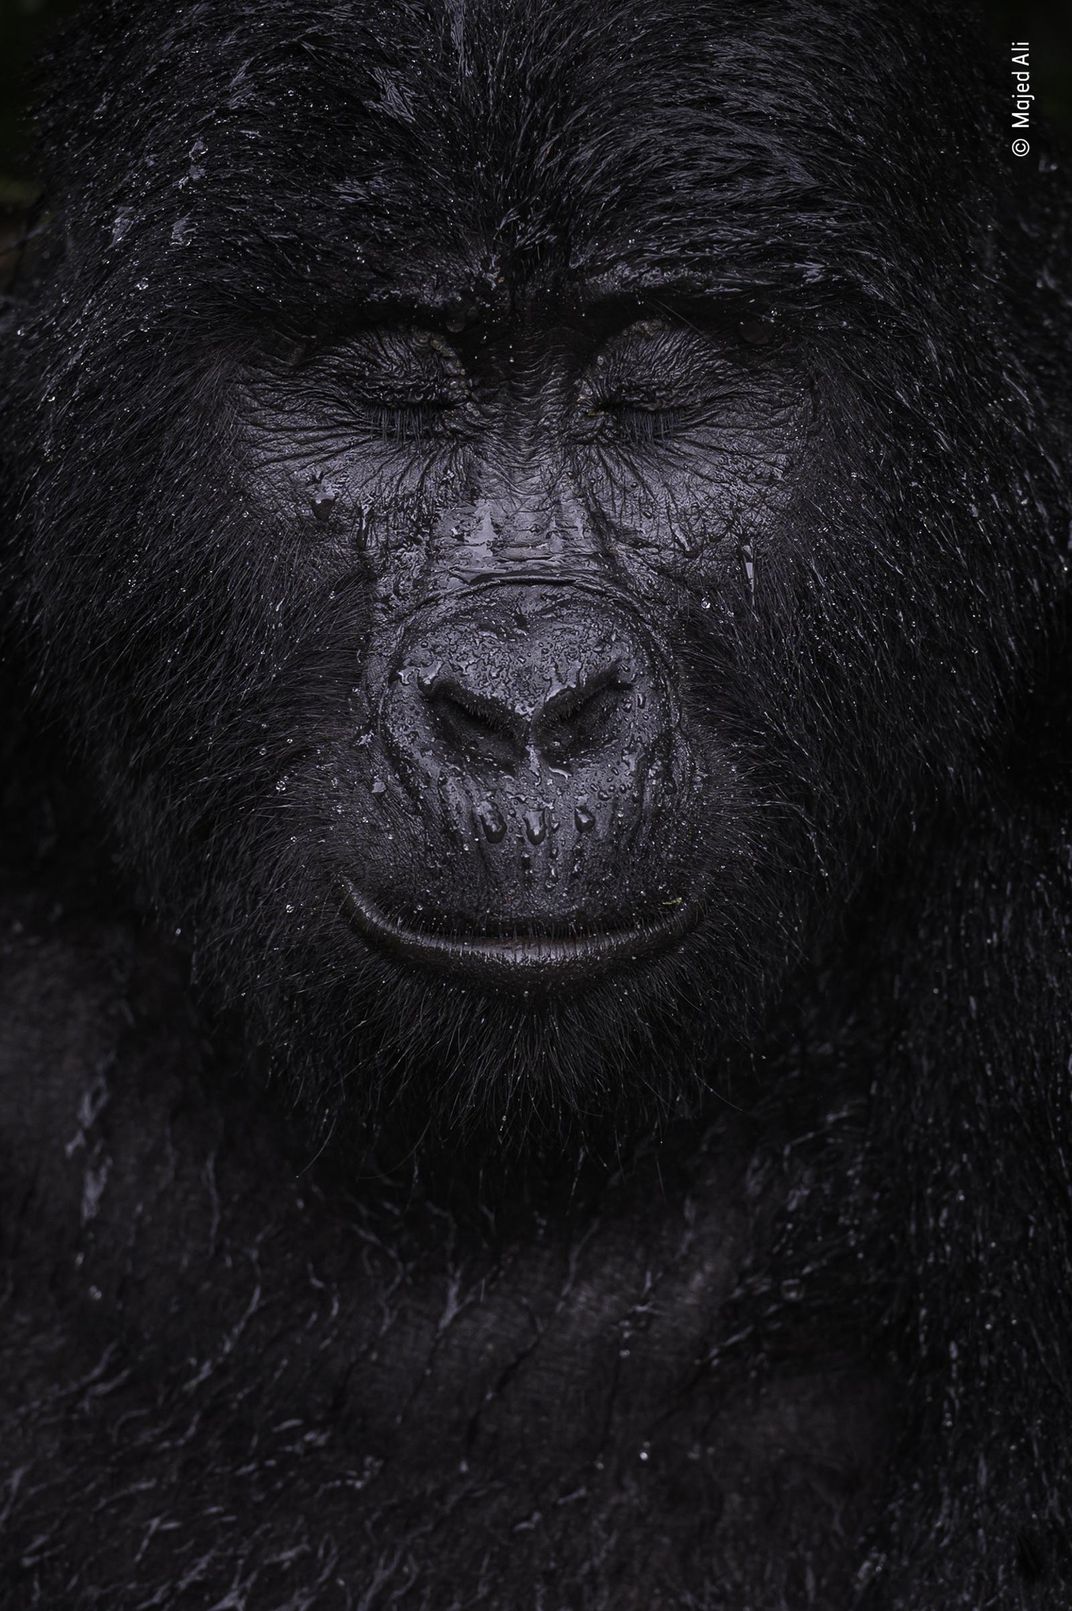 portrait of the face of a male gorilla, with closed eyes